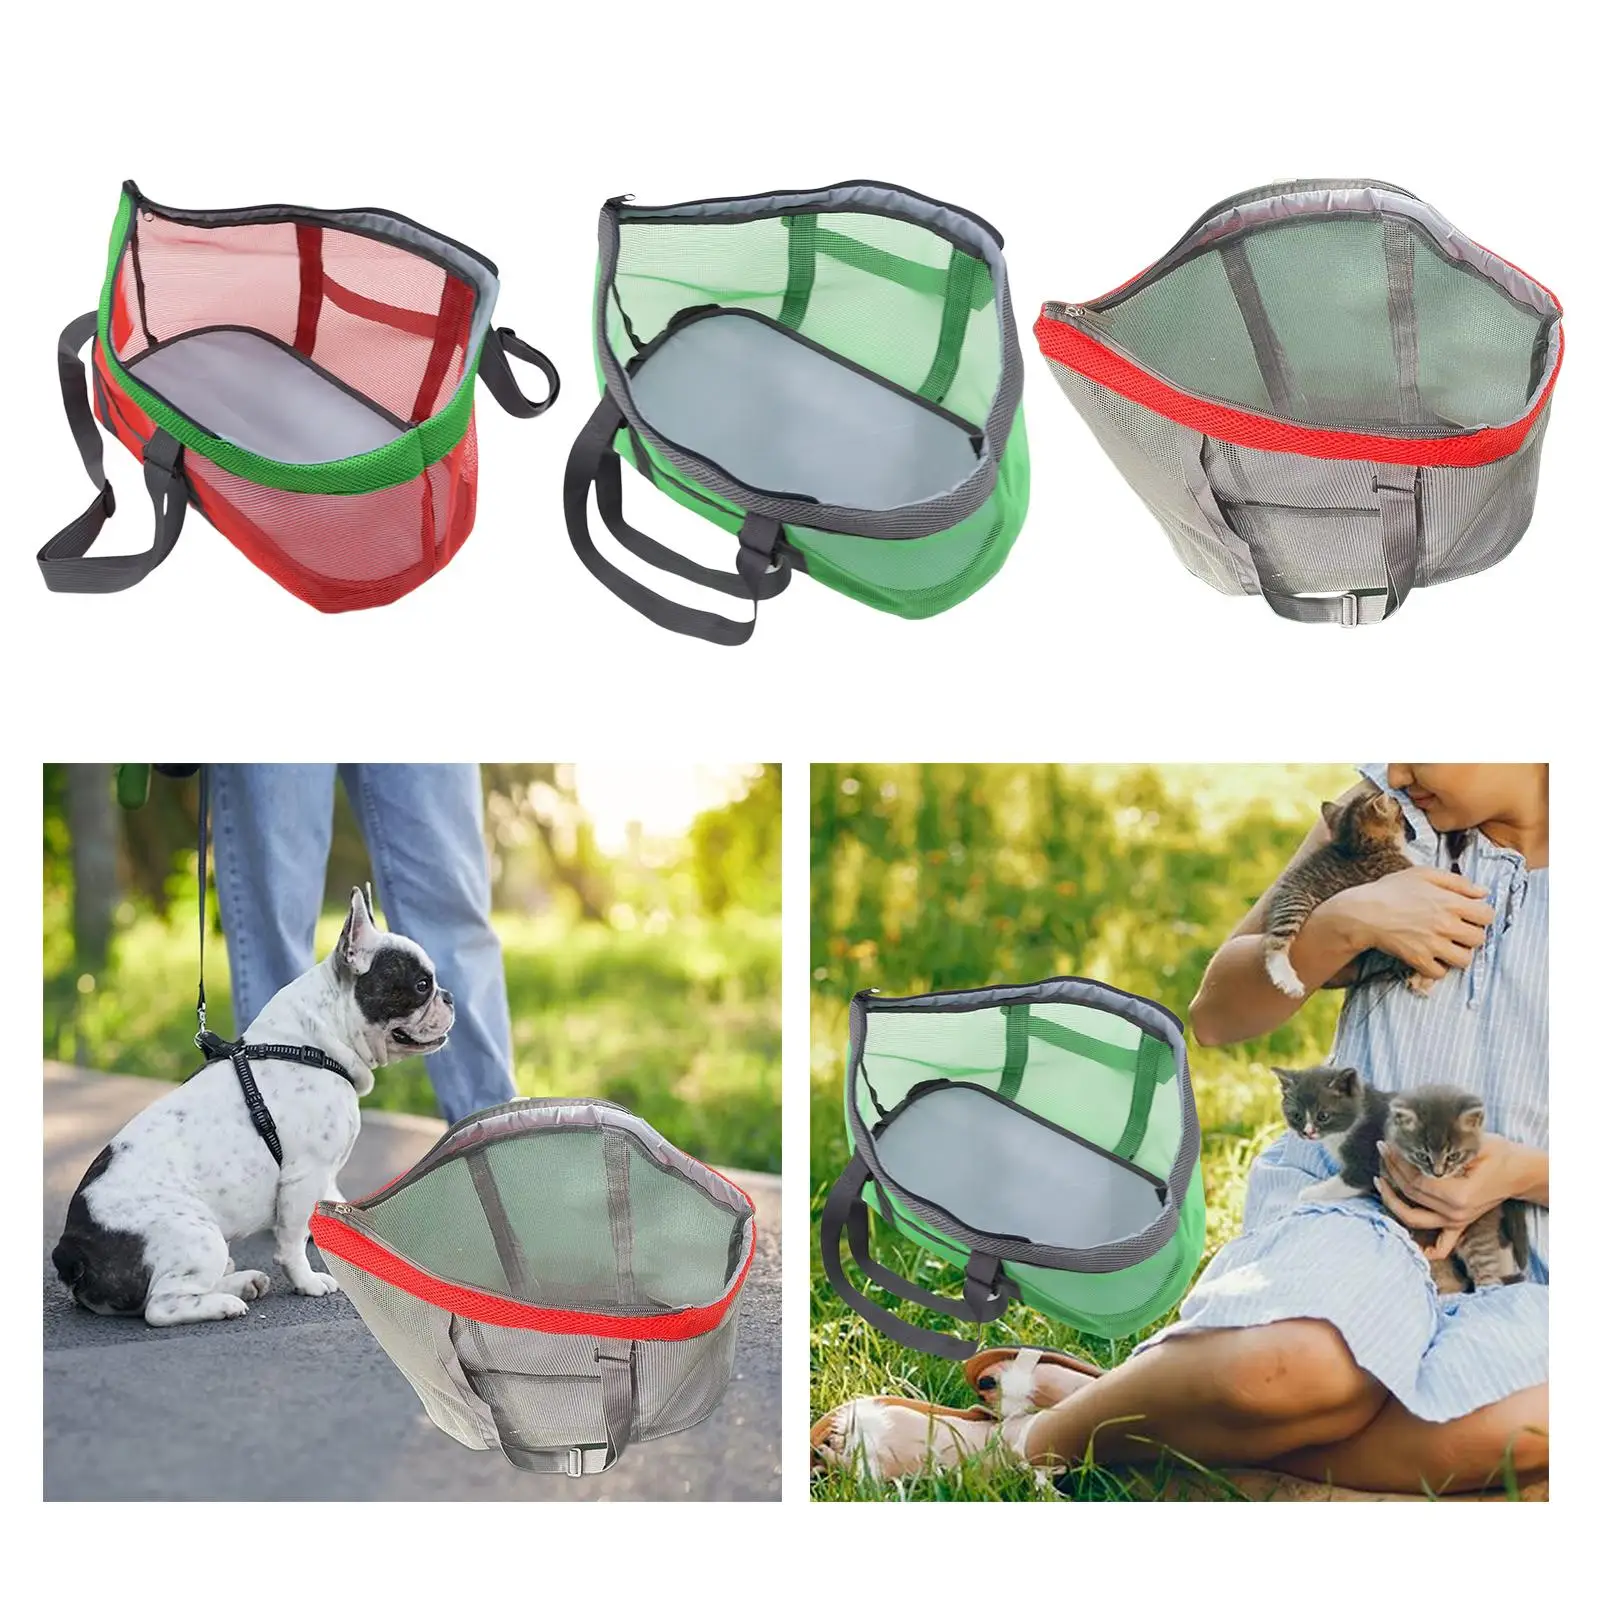 Soft Sided Pet Travel Carrier Bag Foldable Pets Carrying Tote Handbag Dogs Carrier Tote Bag for Cats Travel Small Medium Dog